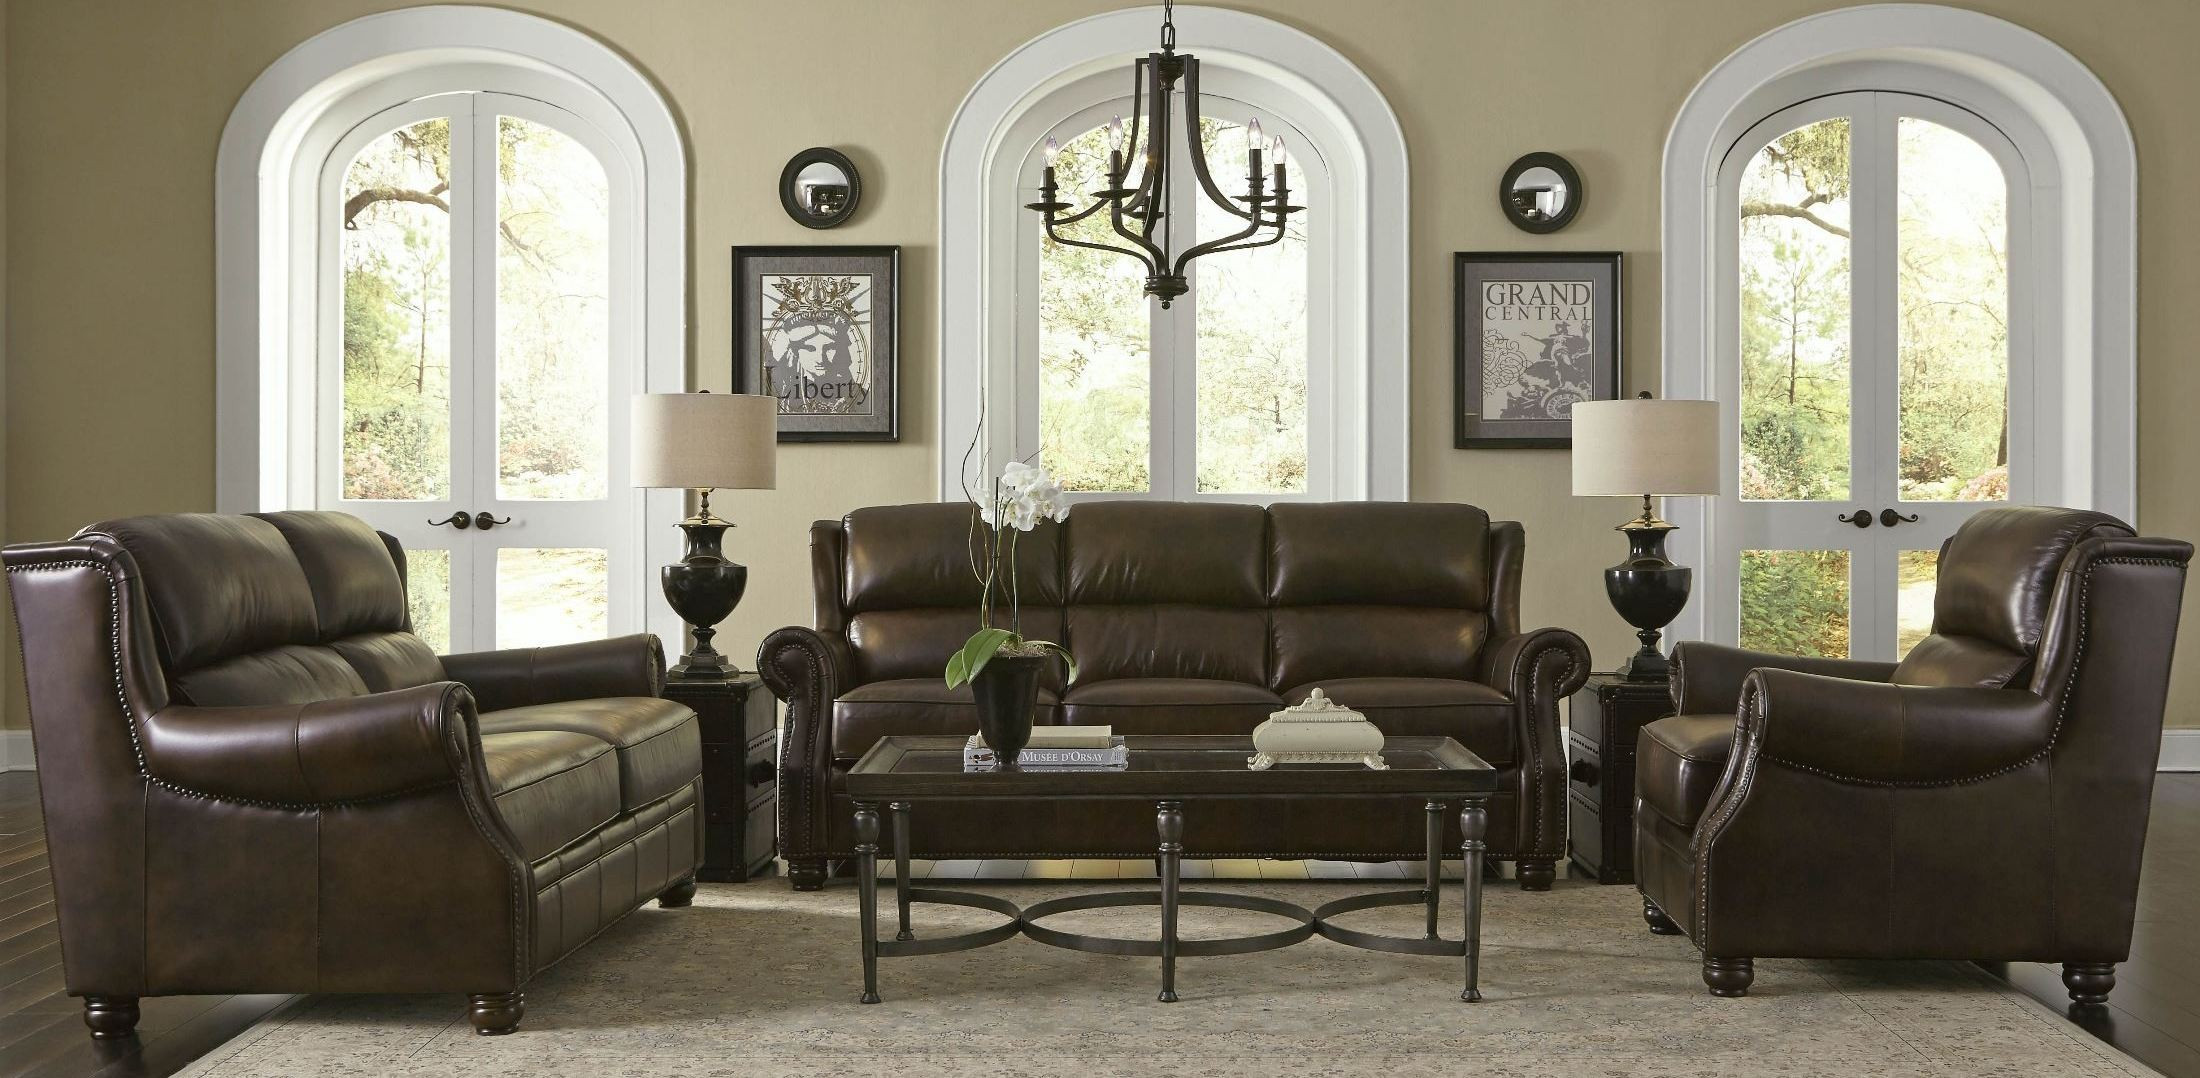 Rustic Leather Living Room Furniture
 Appalachian Rustic Savauge Leather Living Room Set from